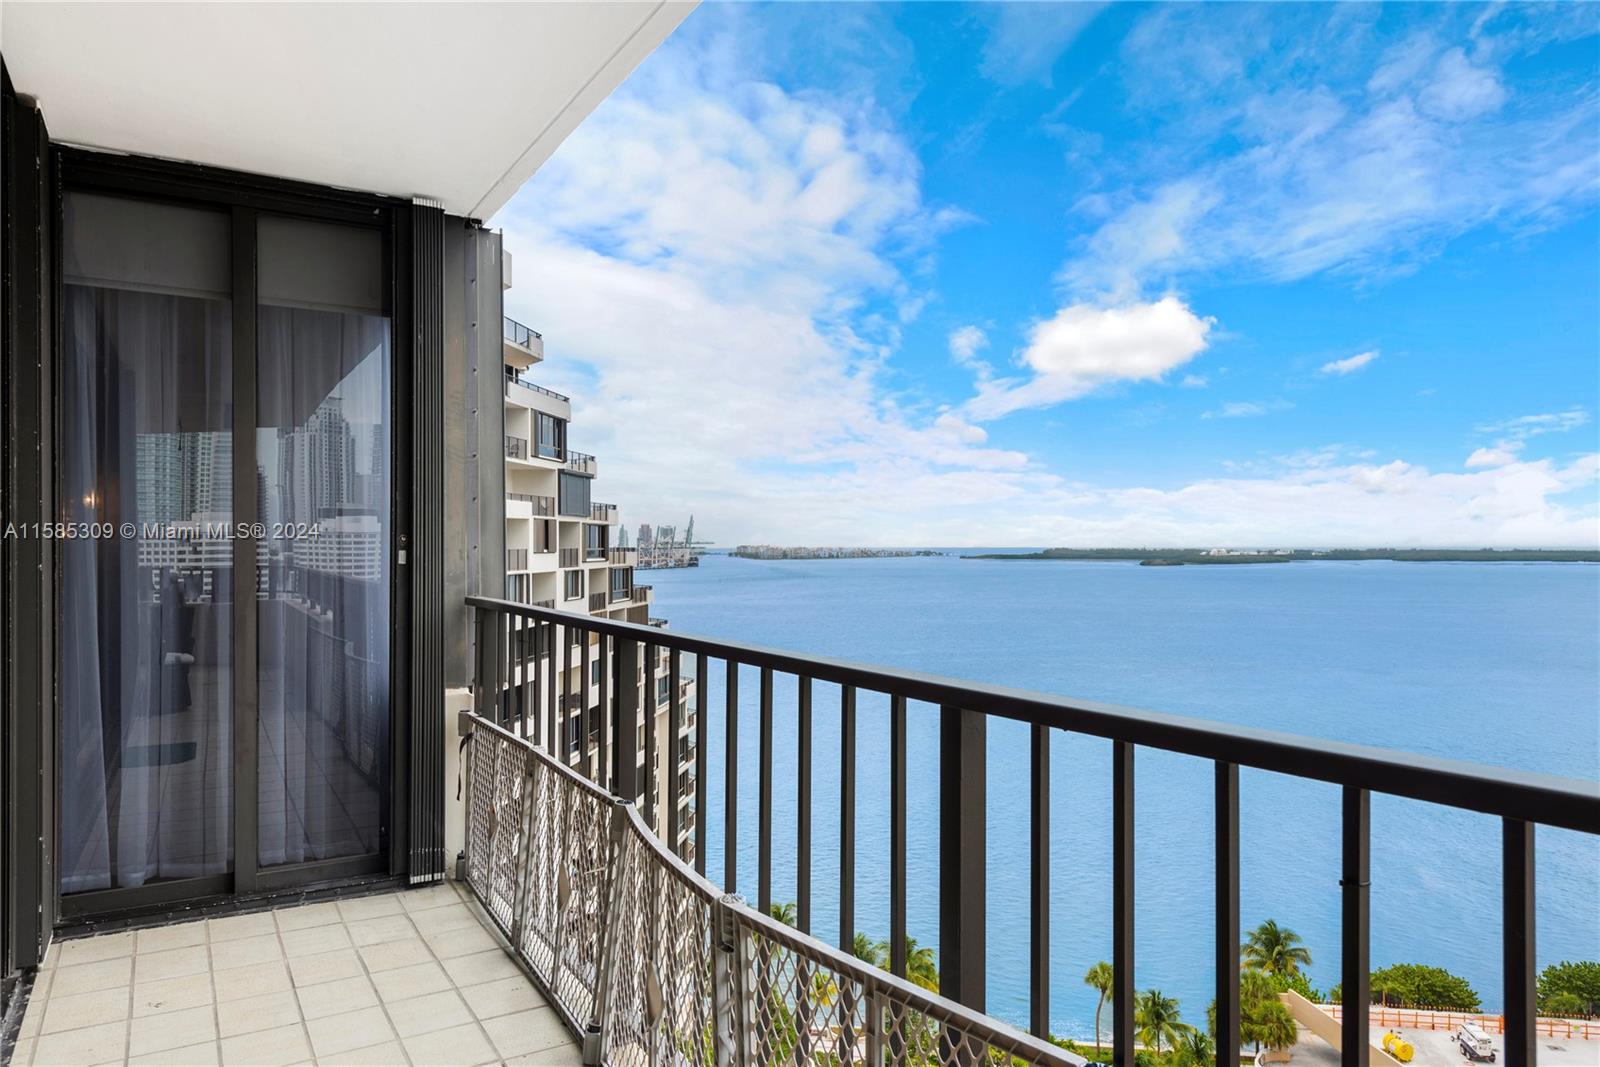 Stunning panoramic Biscayne Bay and Miami skyline views highlight this fully renovated 2-bed, 2.5-bath corner residence at Brickell Key One. This 1,577 square foot unit is open, spacious, and ideal for entertaining, with breathtaking views from the 18th-floor wrap-around balcony. A split-bedroom floor plan provides excellent privacy for residents, with balcony access from both bedrooms. Bedrooms include ample closets and blackout shades. The large customized master closet is an oversized walk-in with private access to the fully updated master bath. This is only available for 6 months and there is a 30 day approval process with the building. Available after June 15.